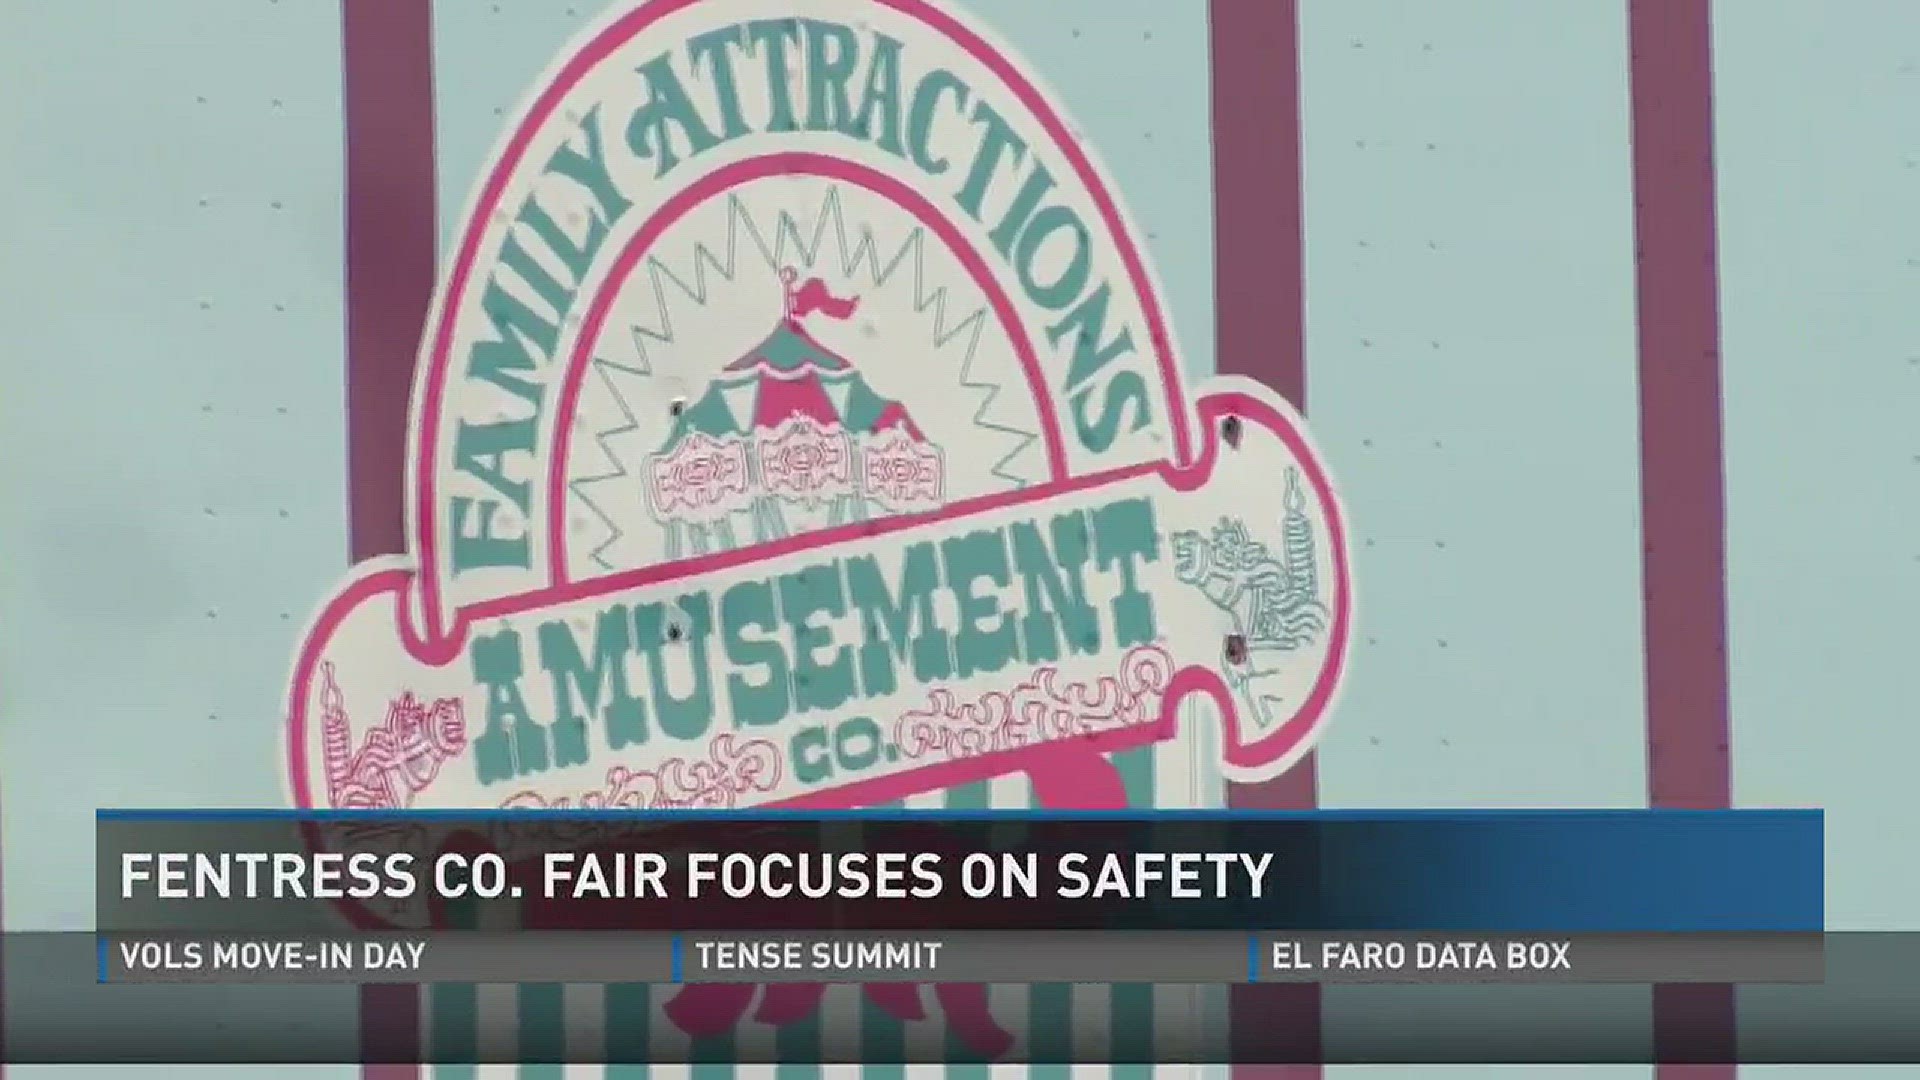 Fentress Co. fair focuses on safety after accident in Greene Co.